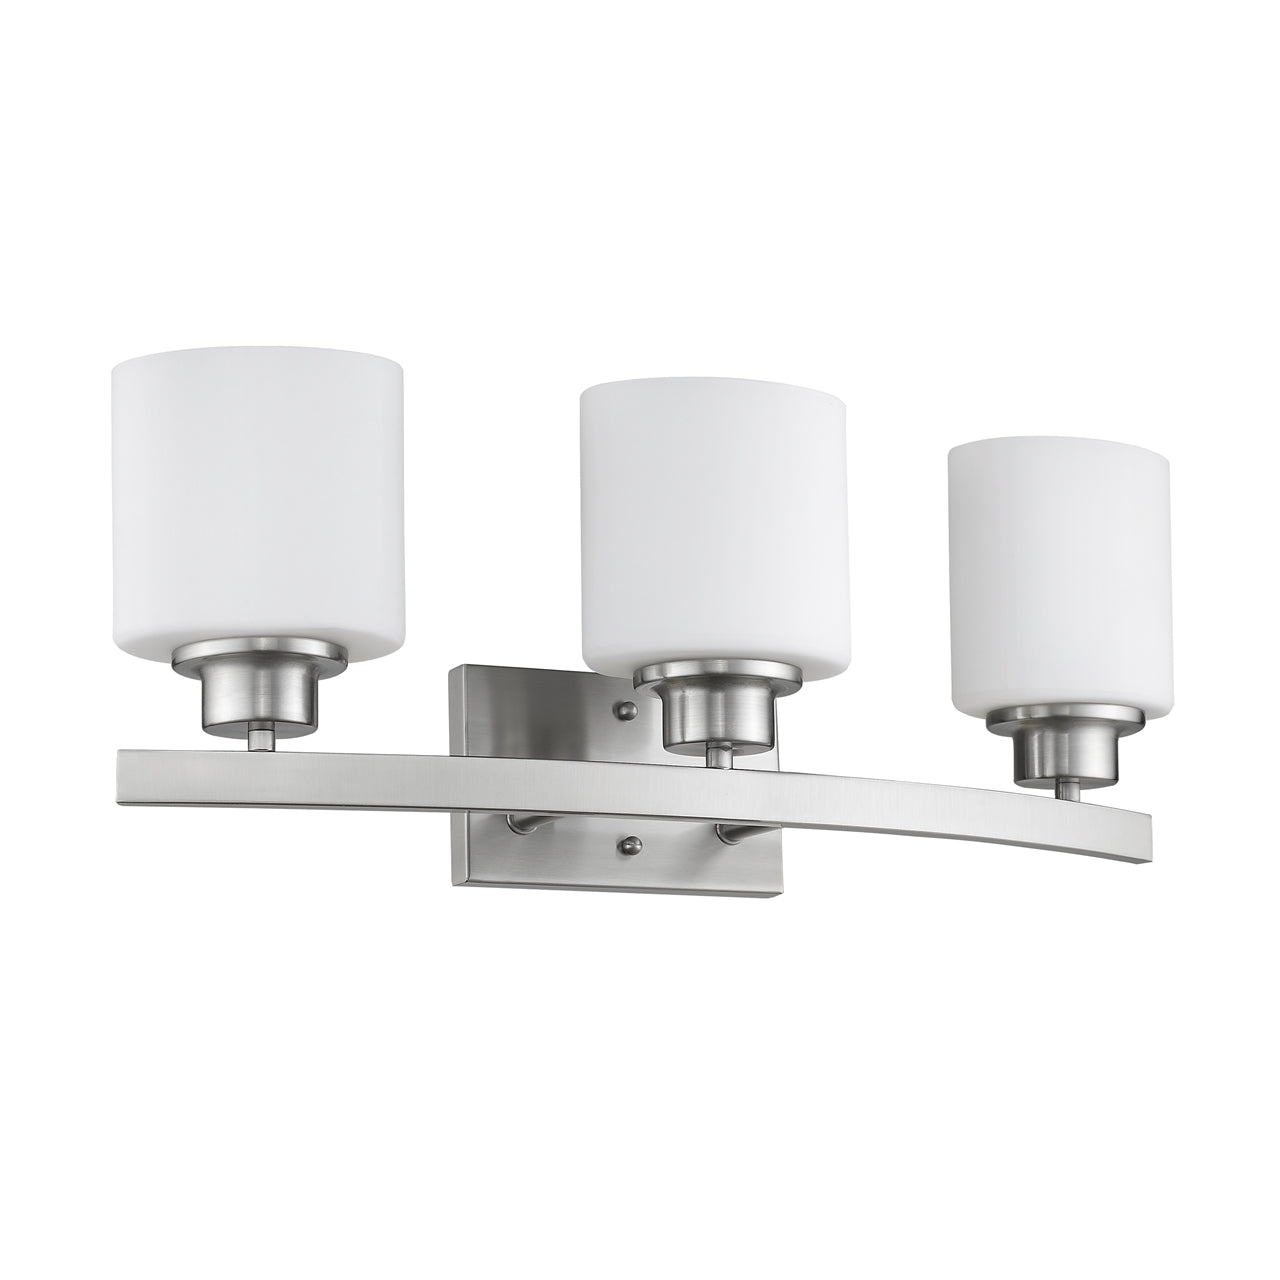 AALIYAH Contemporary 3 Light Brushed Nickel Bath Vanity Light Opal White Glass 23" Wide